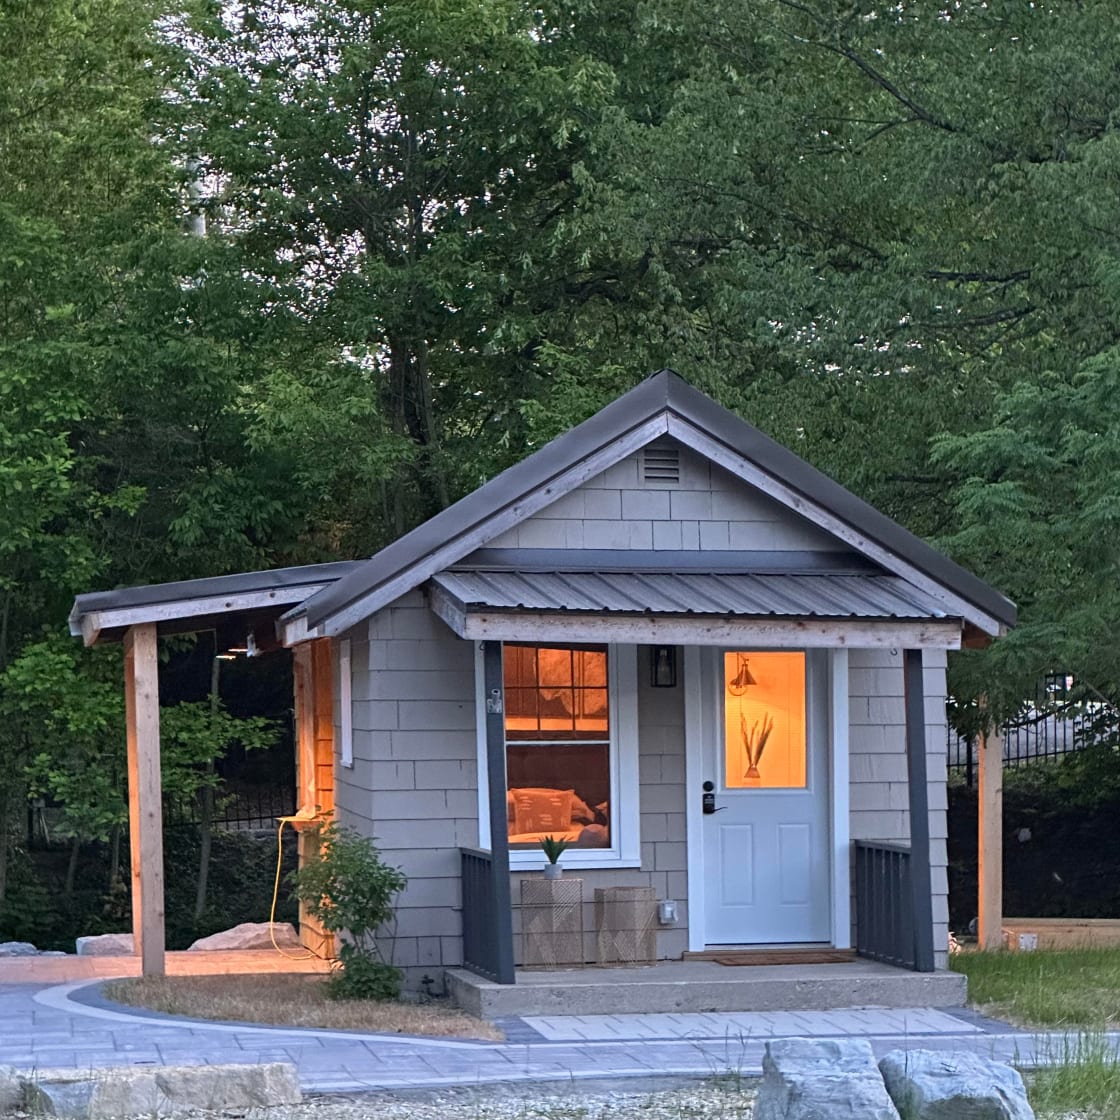 Our cozy tiny cabin consists of a studio-style single bedroom with a phenomenal lake-front view!
